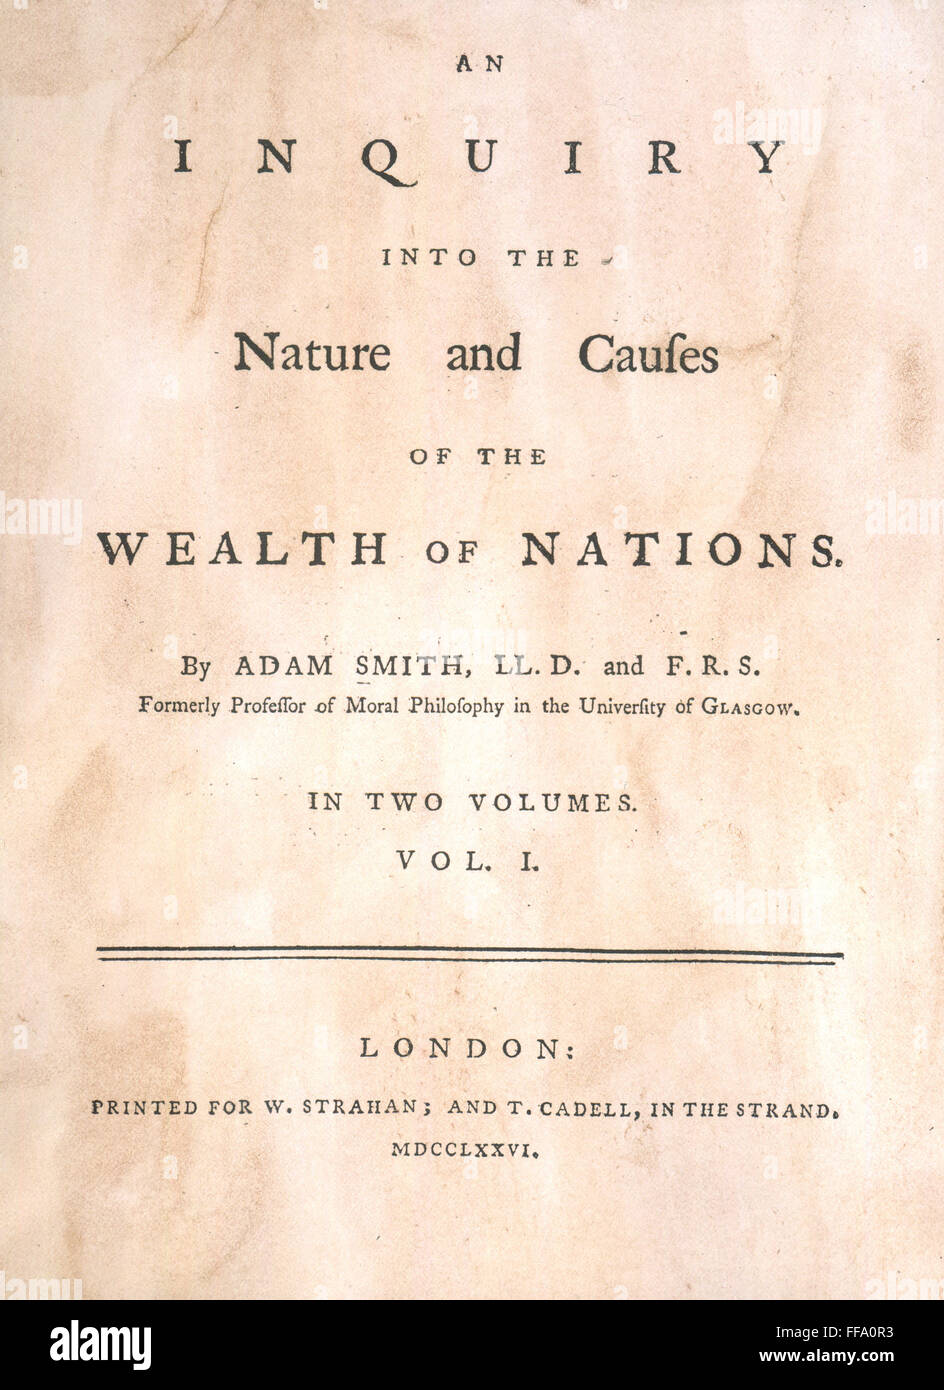 WEALTH OF NATIONS, 1776. /nTitle-page of the first edition of Adam Smith's 'An Inquiry into the Nature and Causes of the Wealth of Nations,' London, 1776. Stock Photo